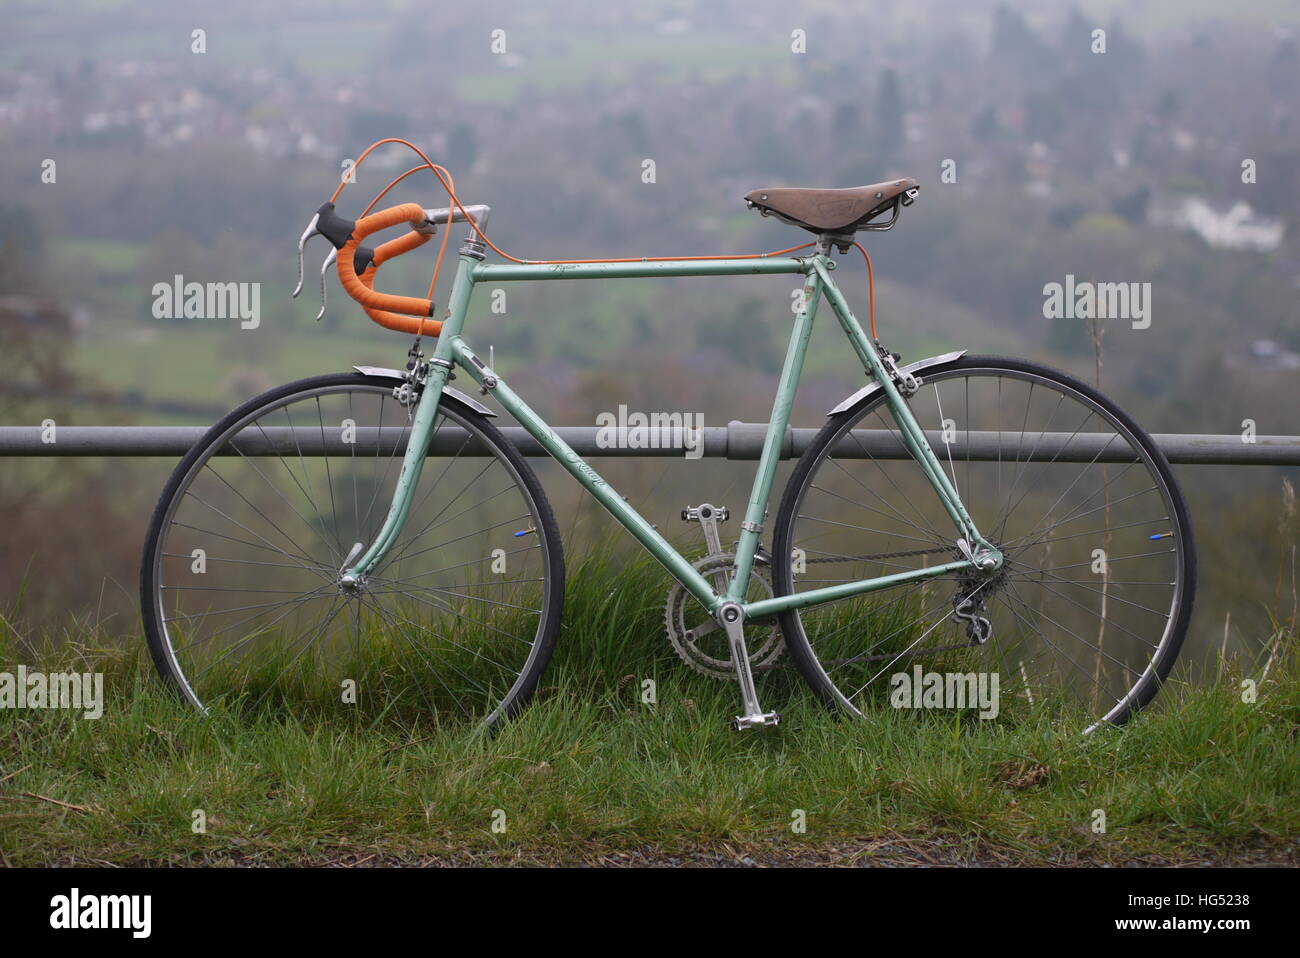 old racing bicycle